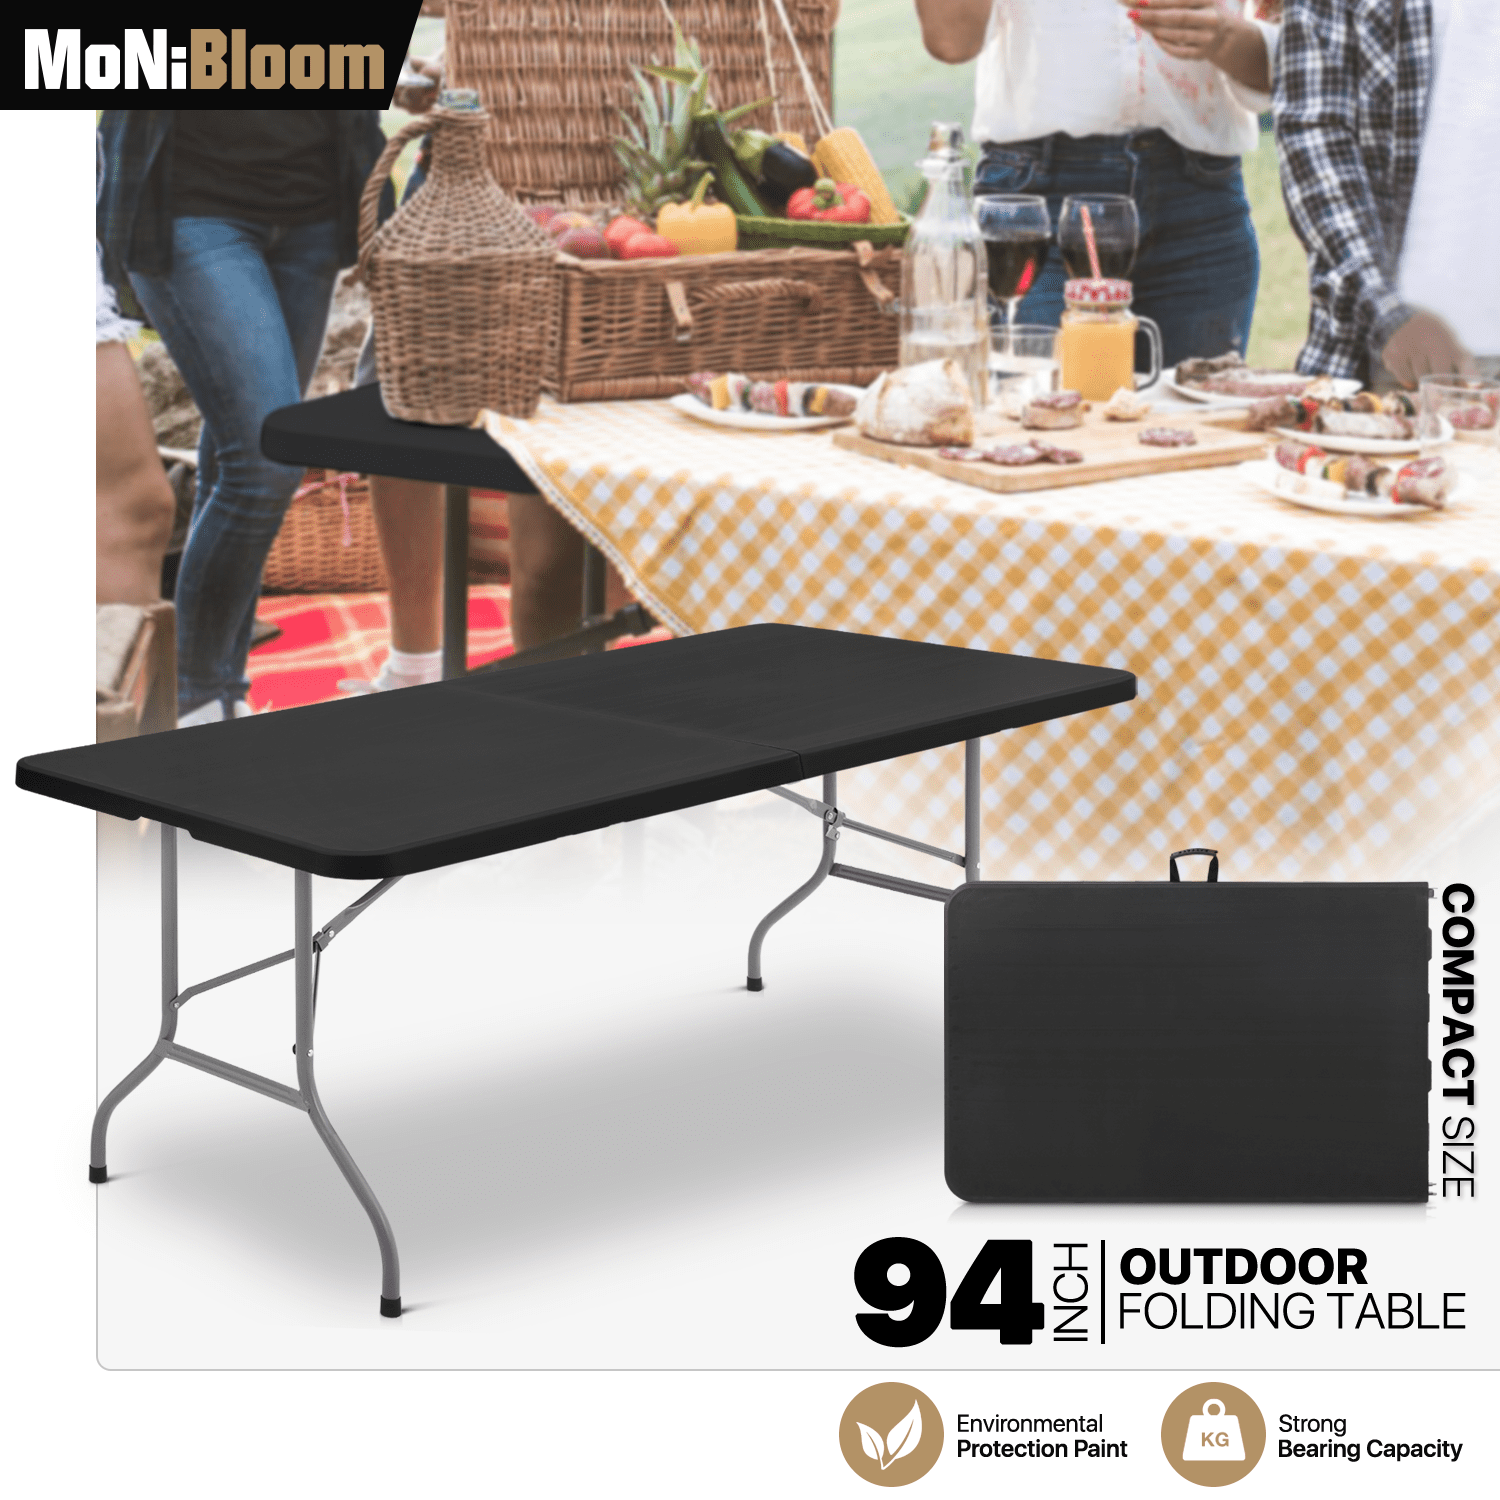 MoNiBloom Table Carrying 8FT for Desk Dining Outdoor Outdoor Camping Camping Handle, Table Party Plastic Folding Rectangle BBQ with Black